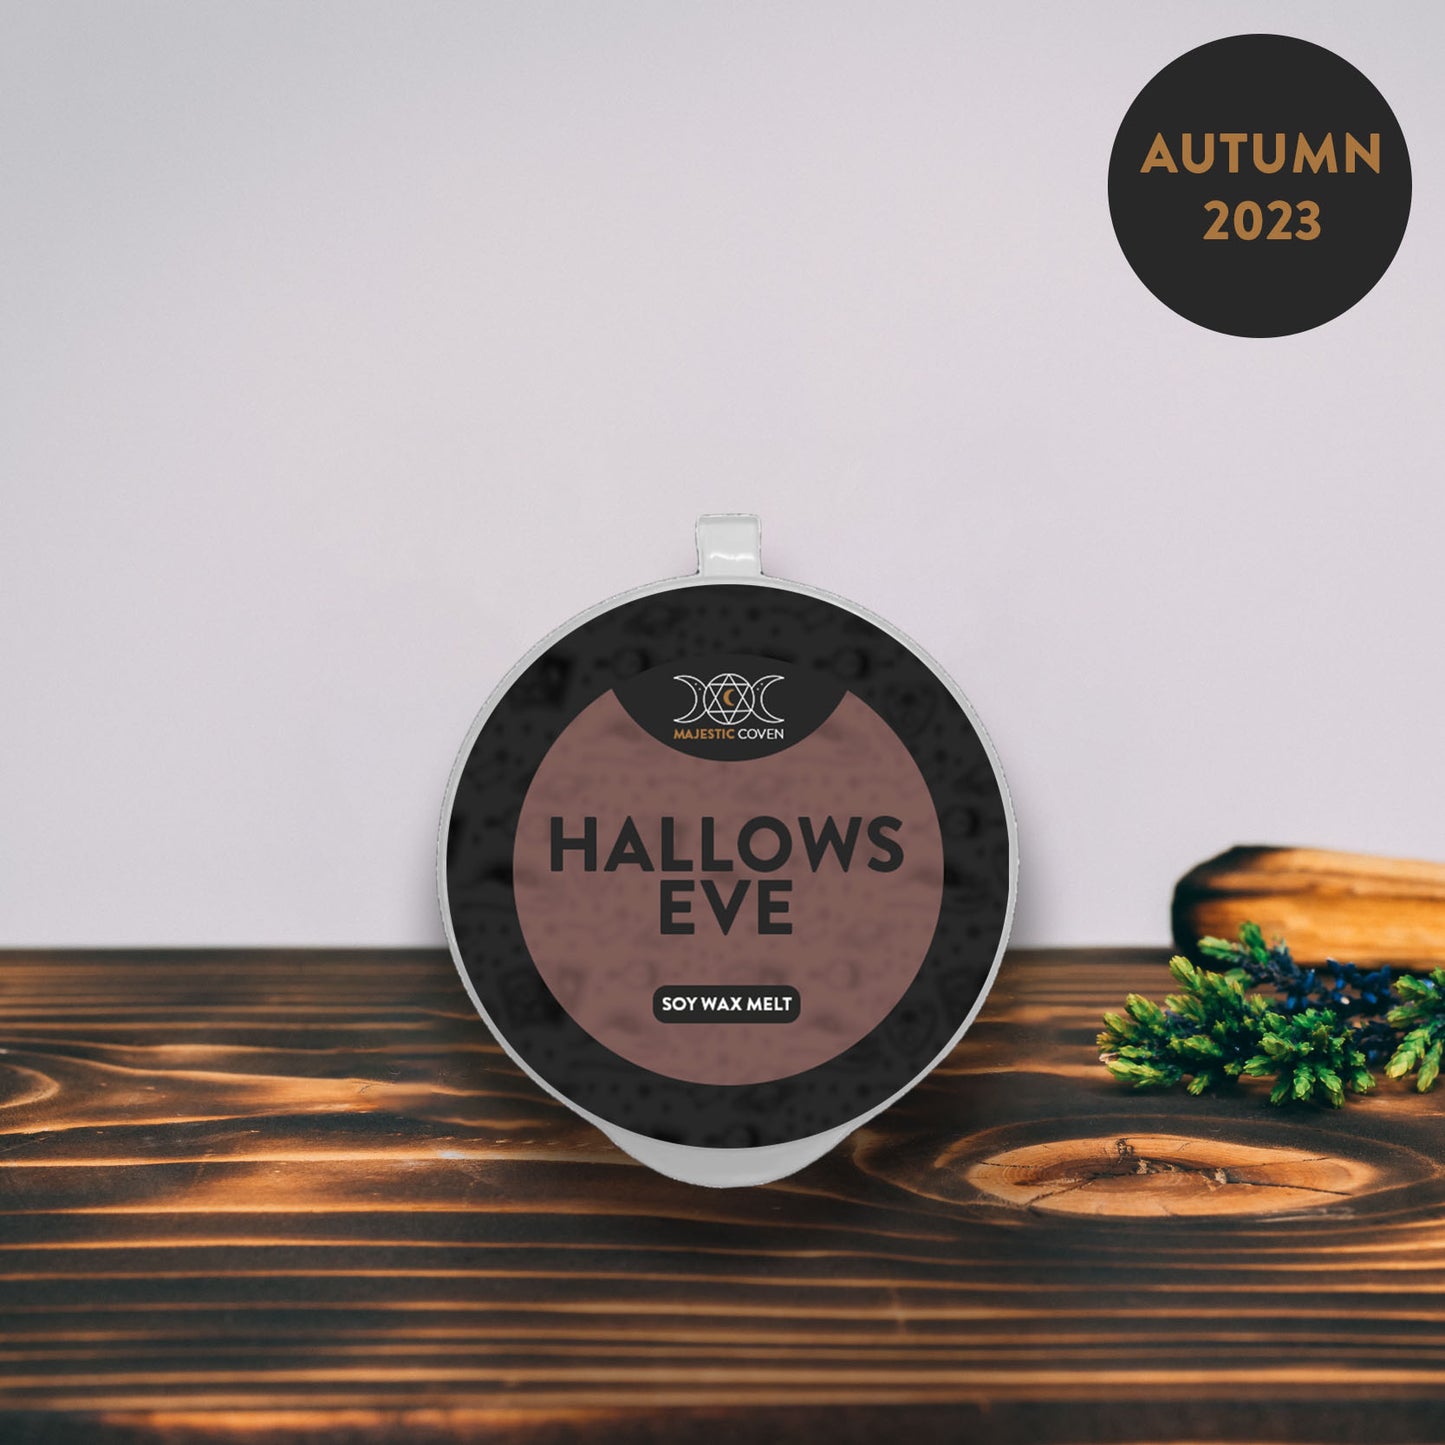 Hallows Eve - Soy Wax Melt 20g Sample Pot Majestic Coven